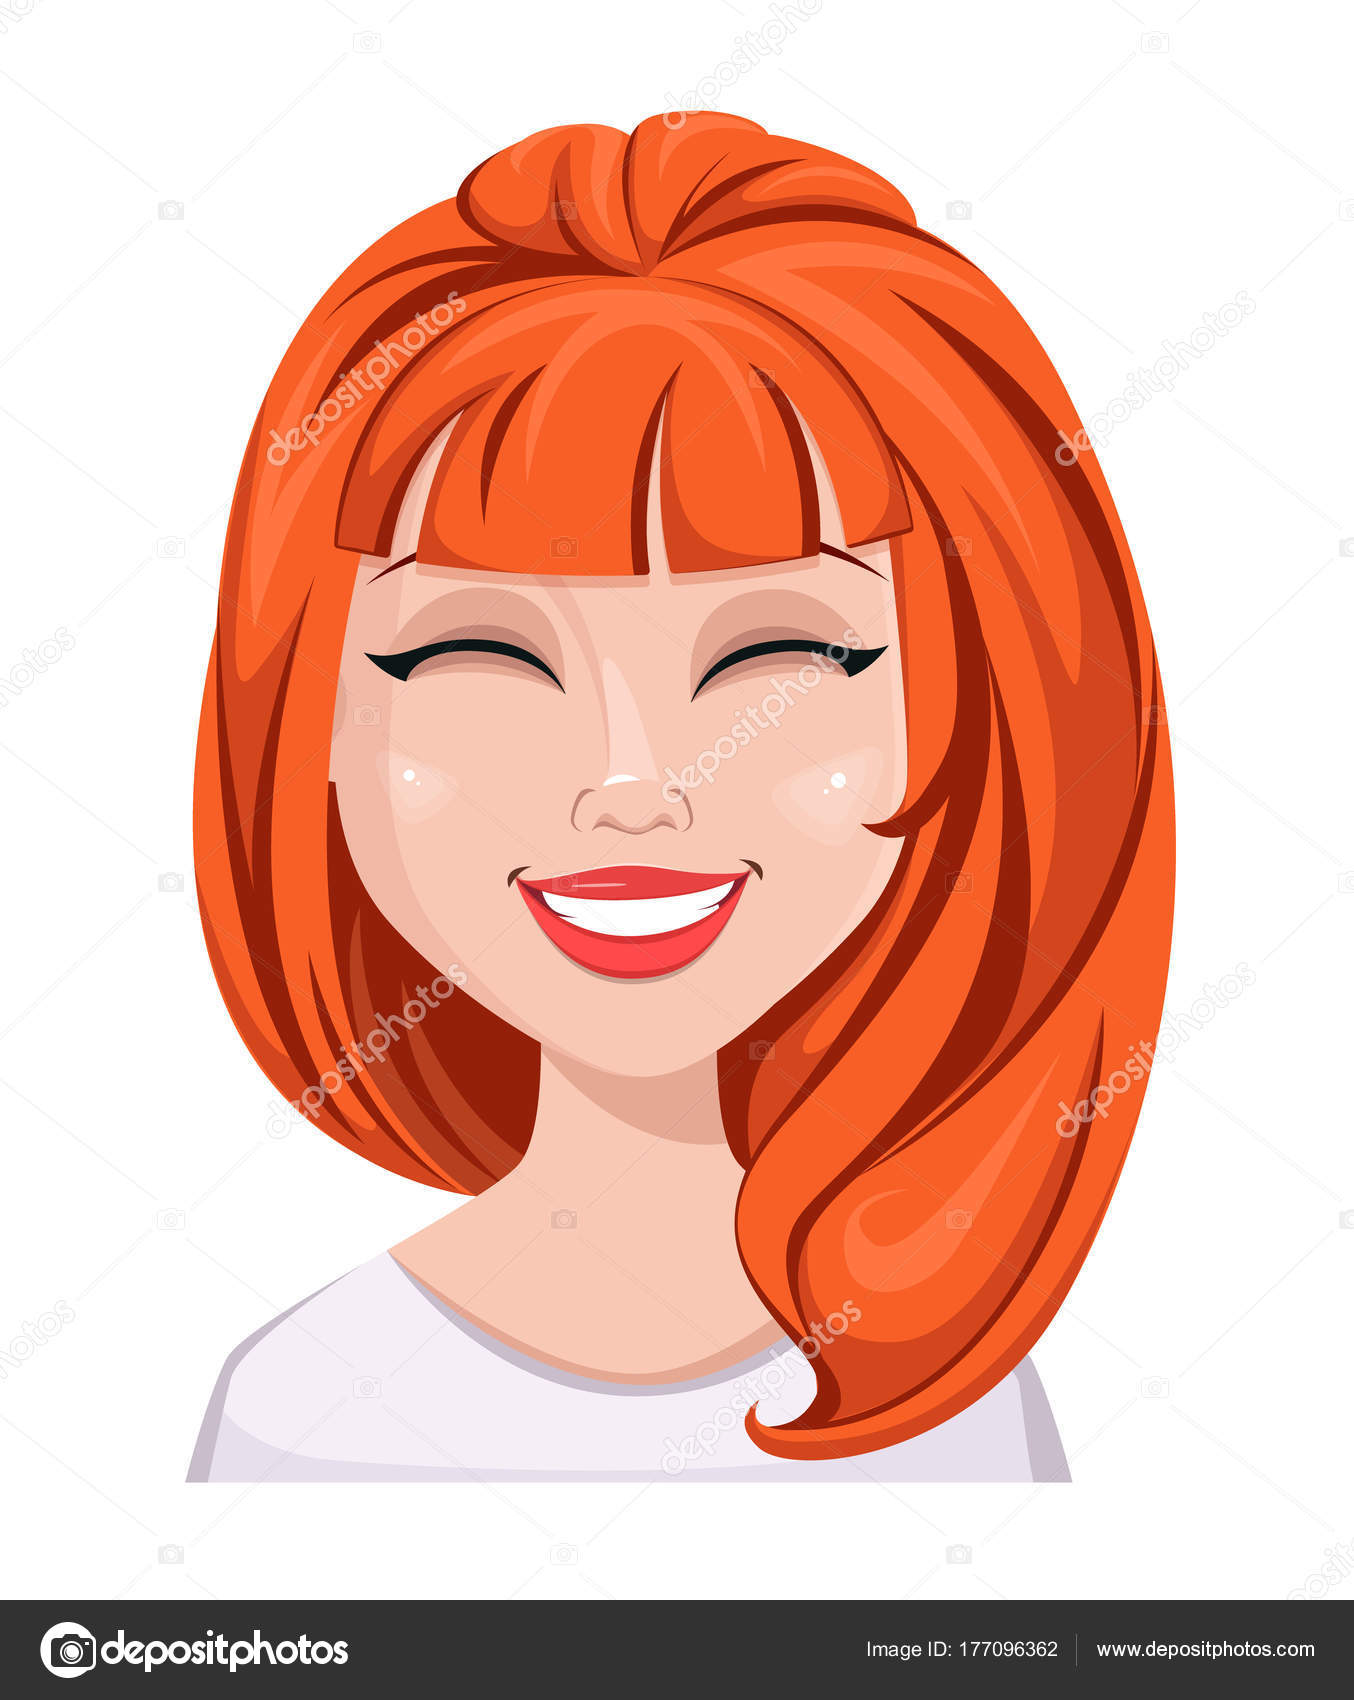 Facial Expression Of A Redhead Woman Laughing Stock Vector Image By ©vectorkif 177096362